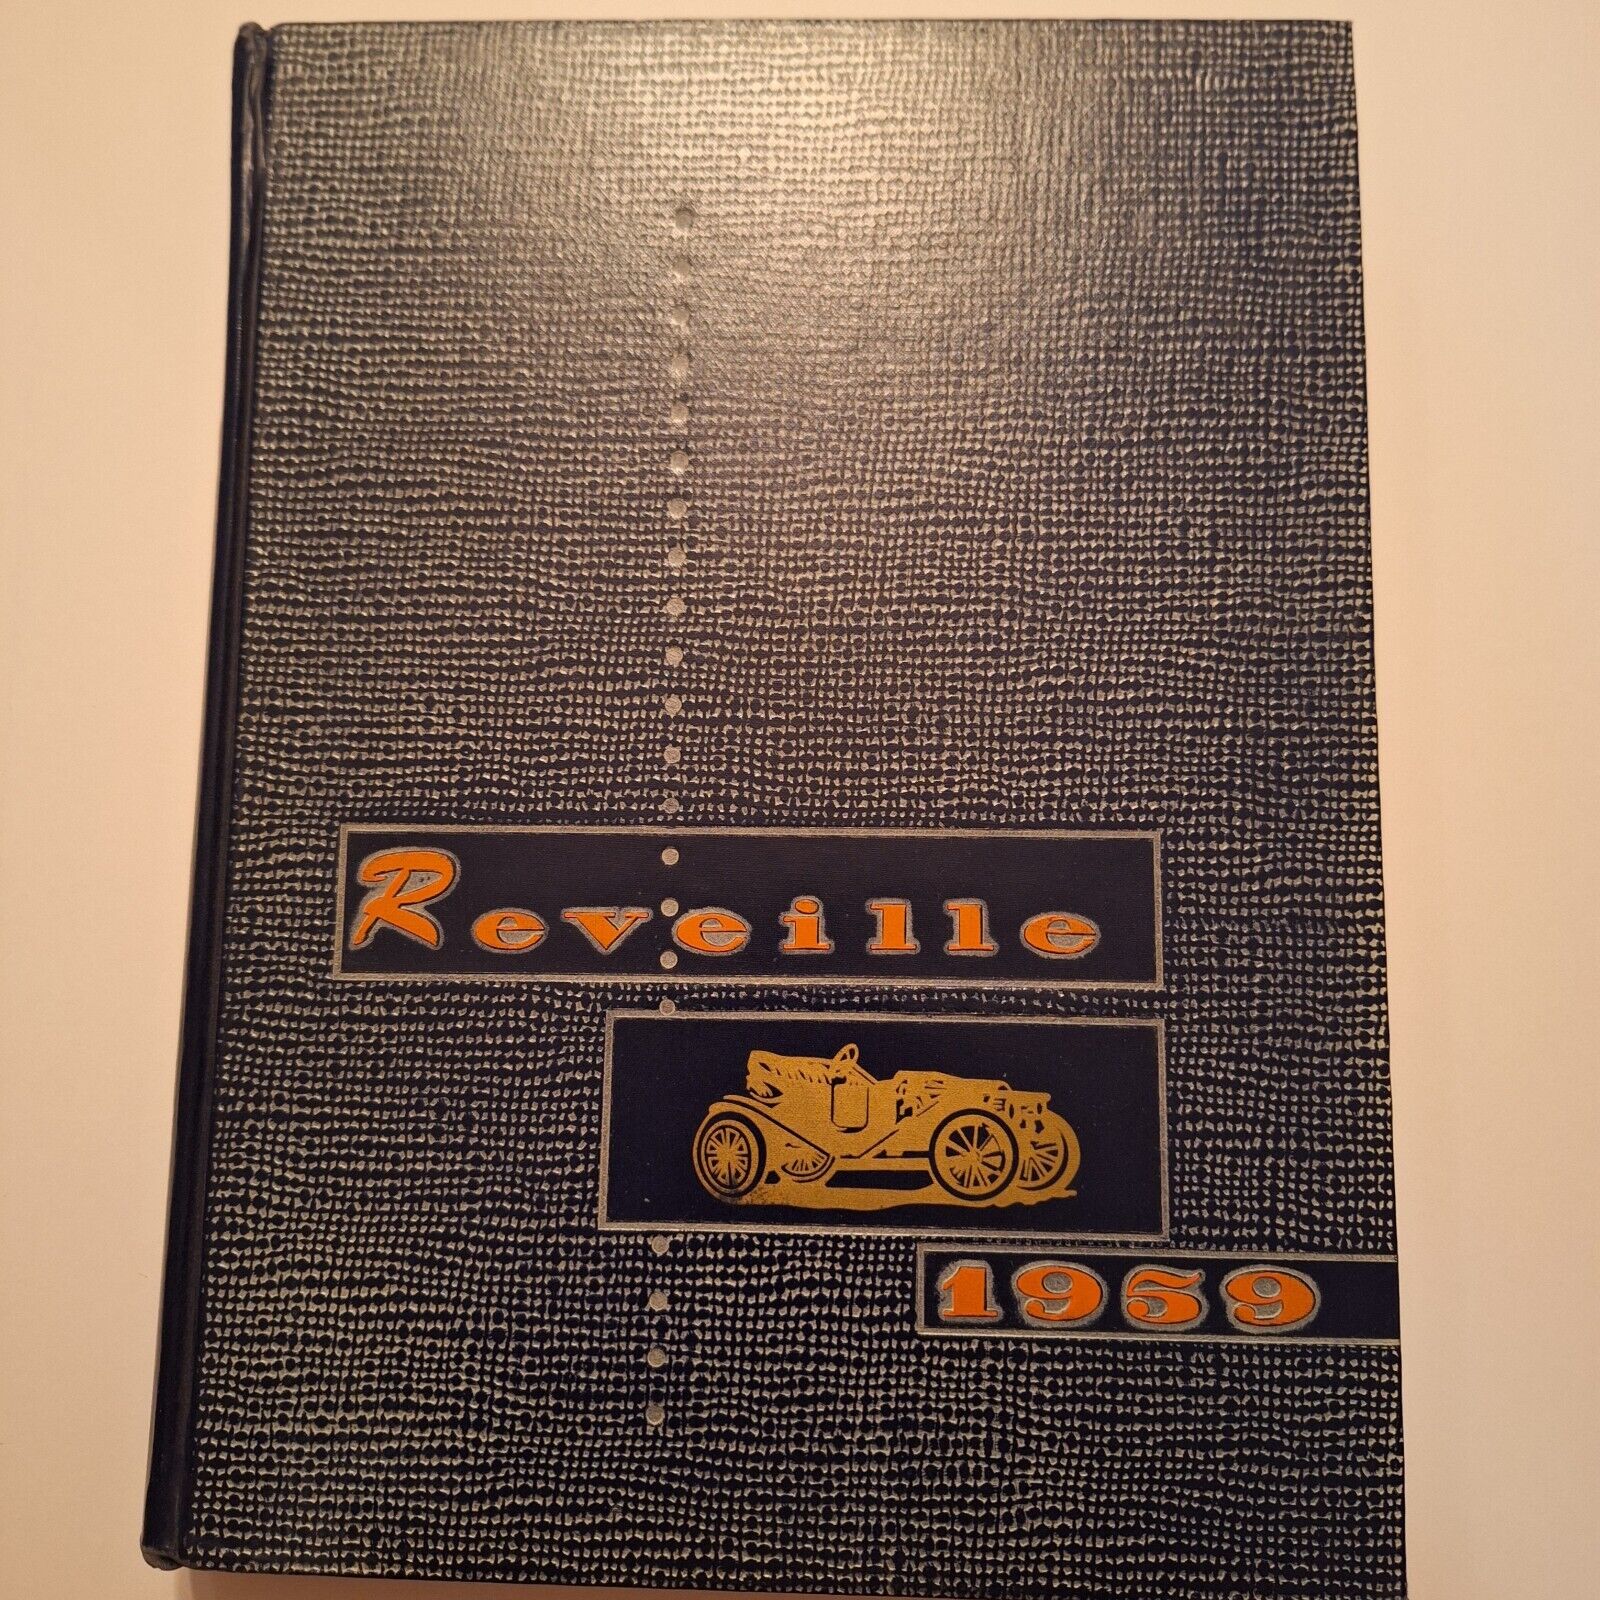 The Reveille 1959, Arlington State College yearbook